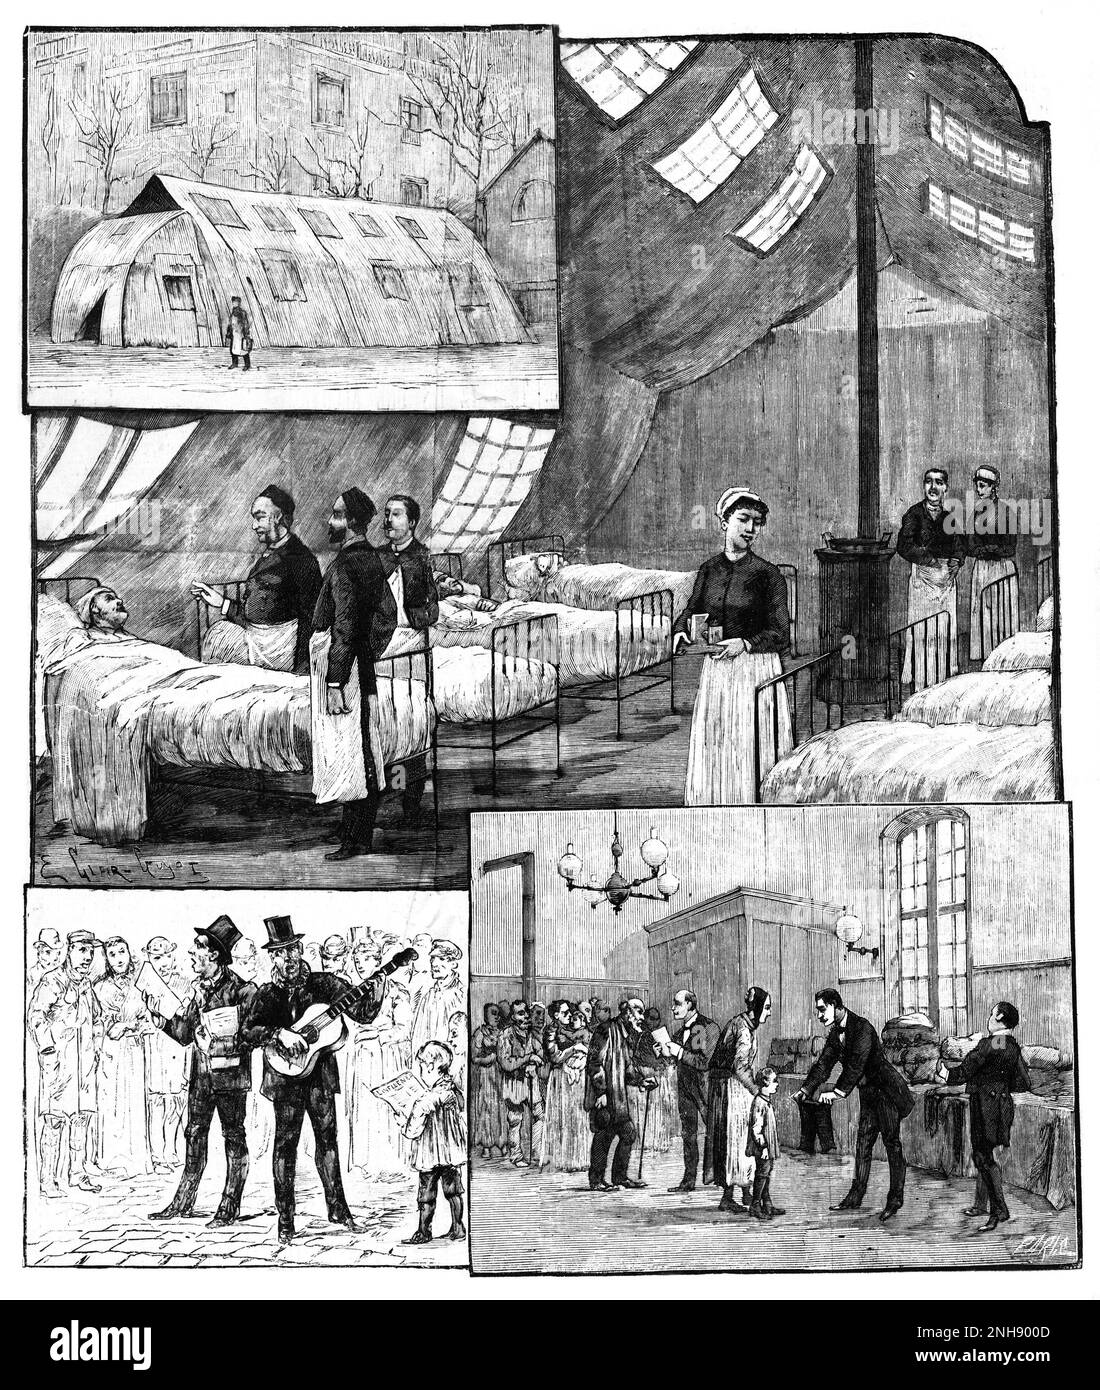 Three illustrations relating to the influenza pandemic in Paris, from the cover of Le Petit Parisien, January, 1890: the interior and exterior of a special tent set up as a ward for the sick in the courtyard of the hospital; two men singing a song about influenza to a crowd; the distribution of clothes to families of victims. The 1889-1890 pandemic, often referred to as the Russian Flu, was one of the deadliest pandemics in history, killing one million people. Stock Photo